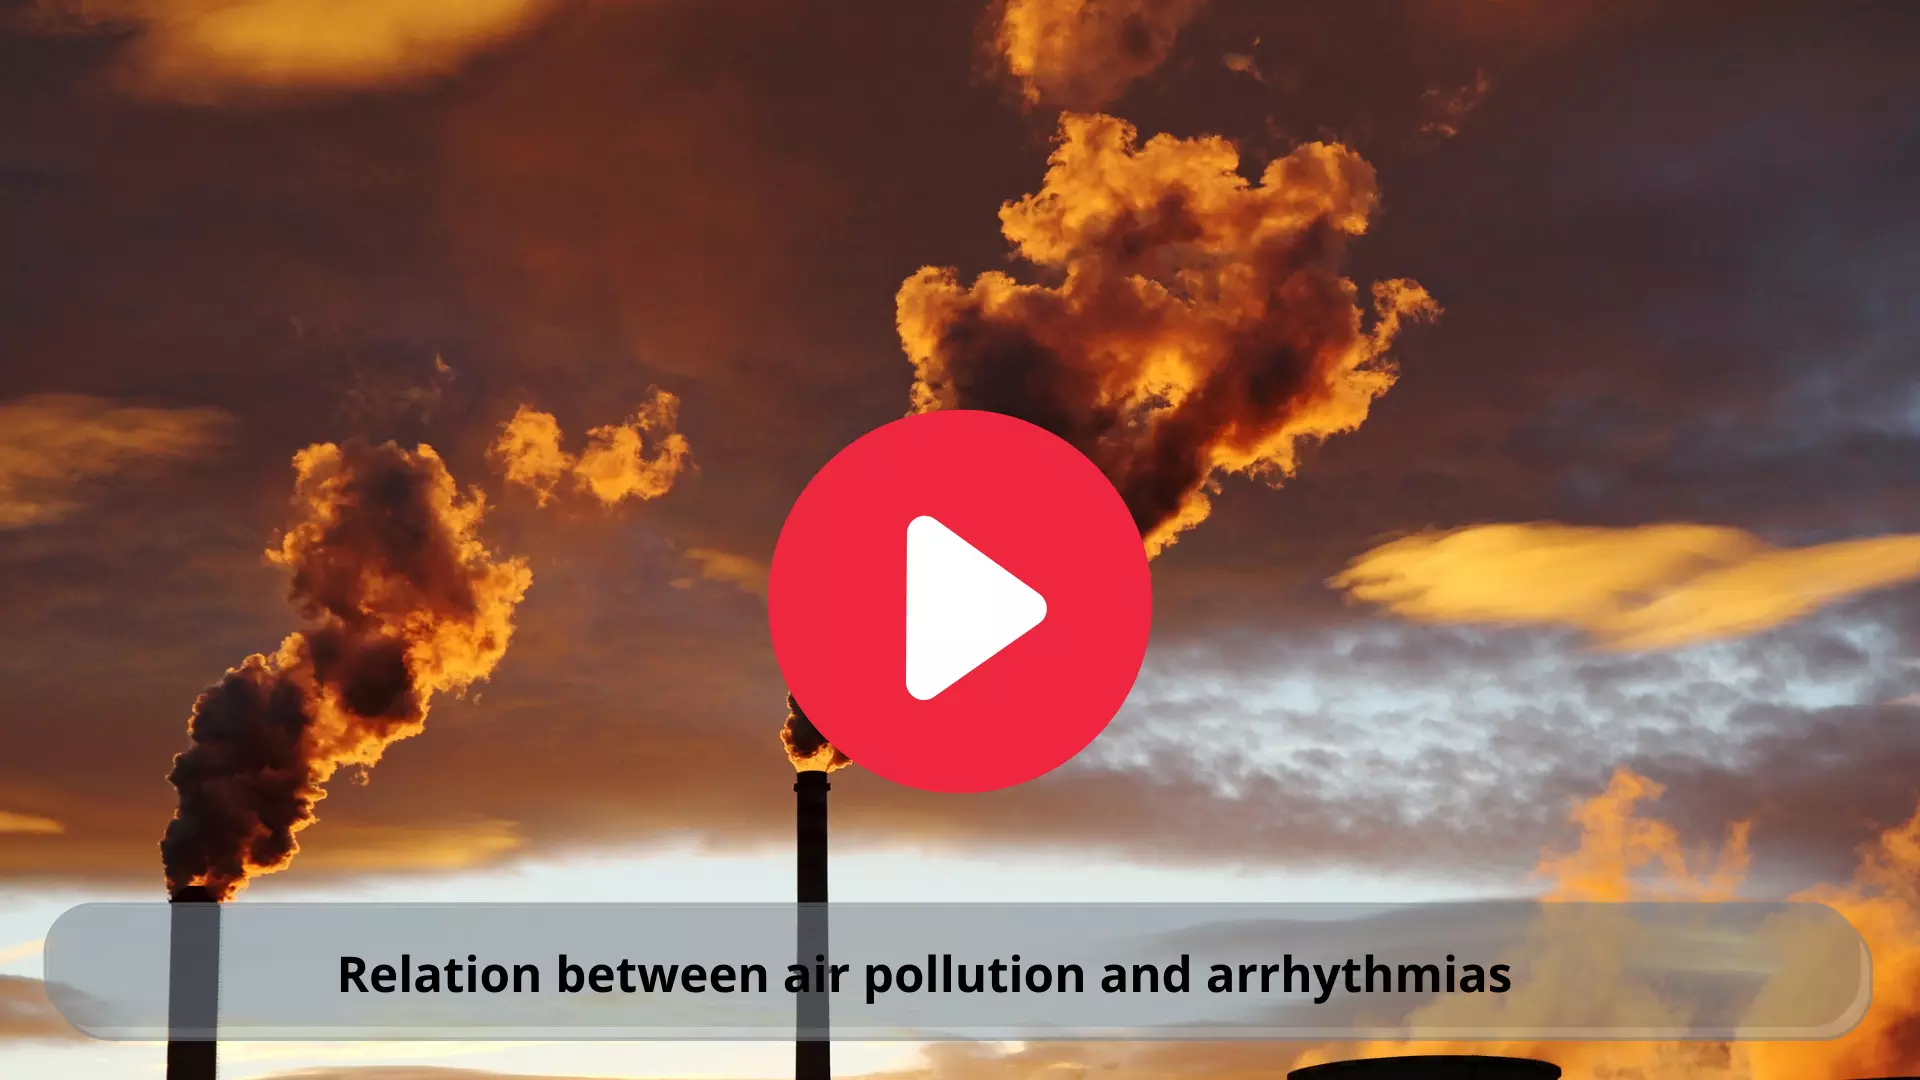 Relation between air pollution and arrhythmias